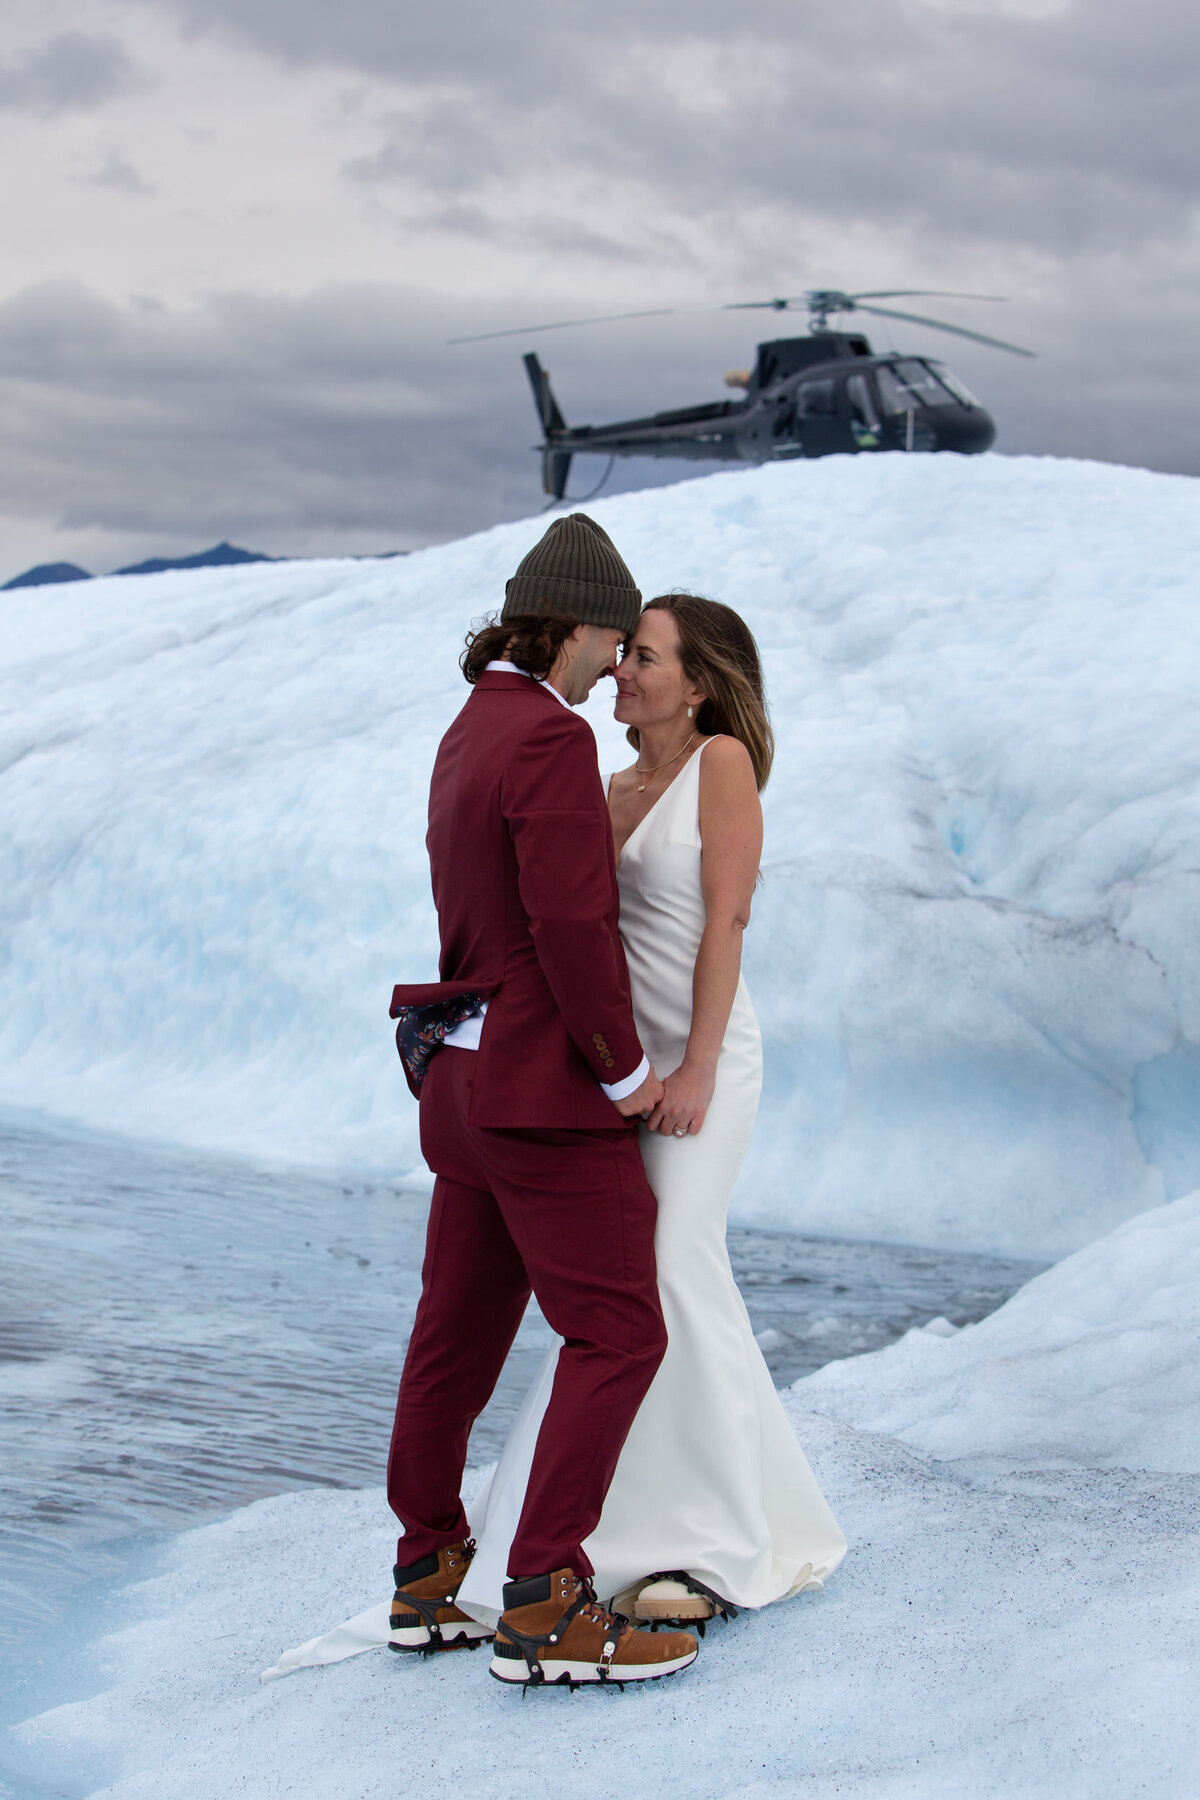 A bride and groom stand on a glacier with a helicopter parked behind them.